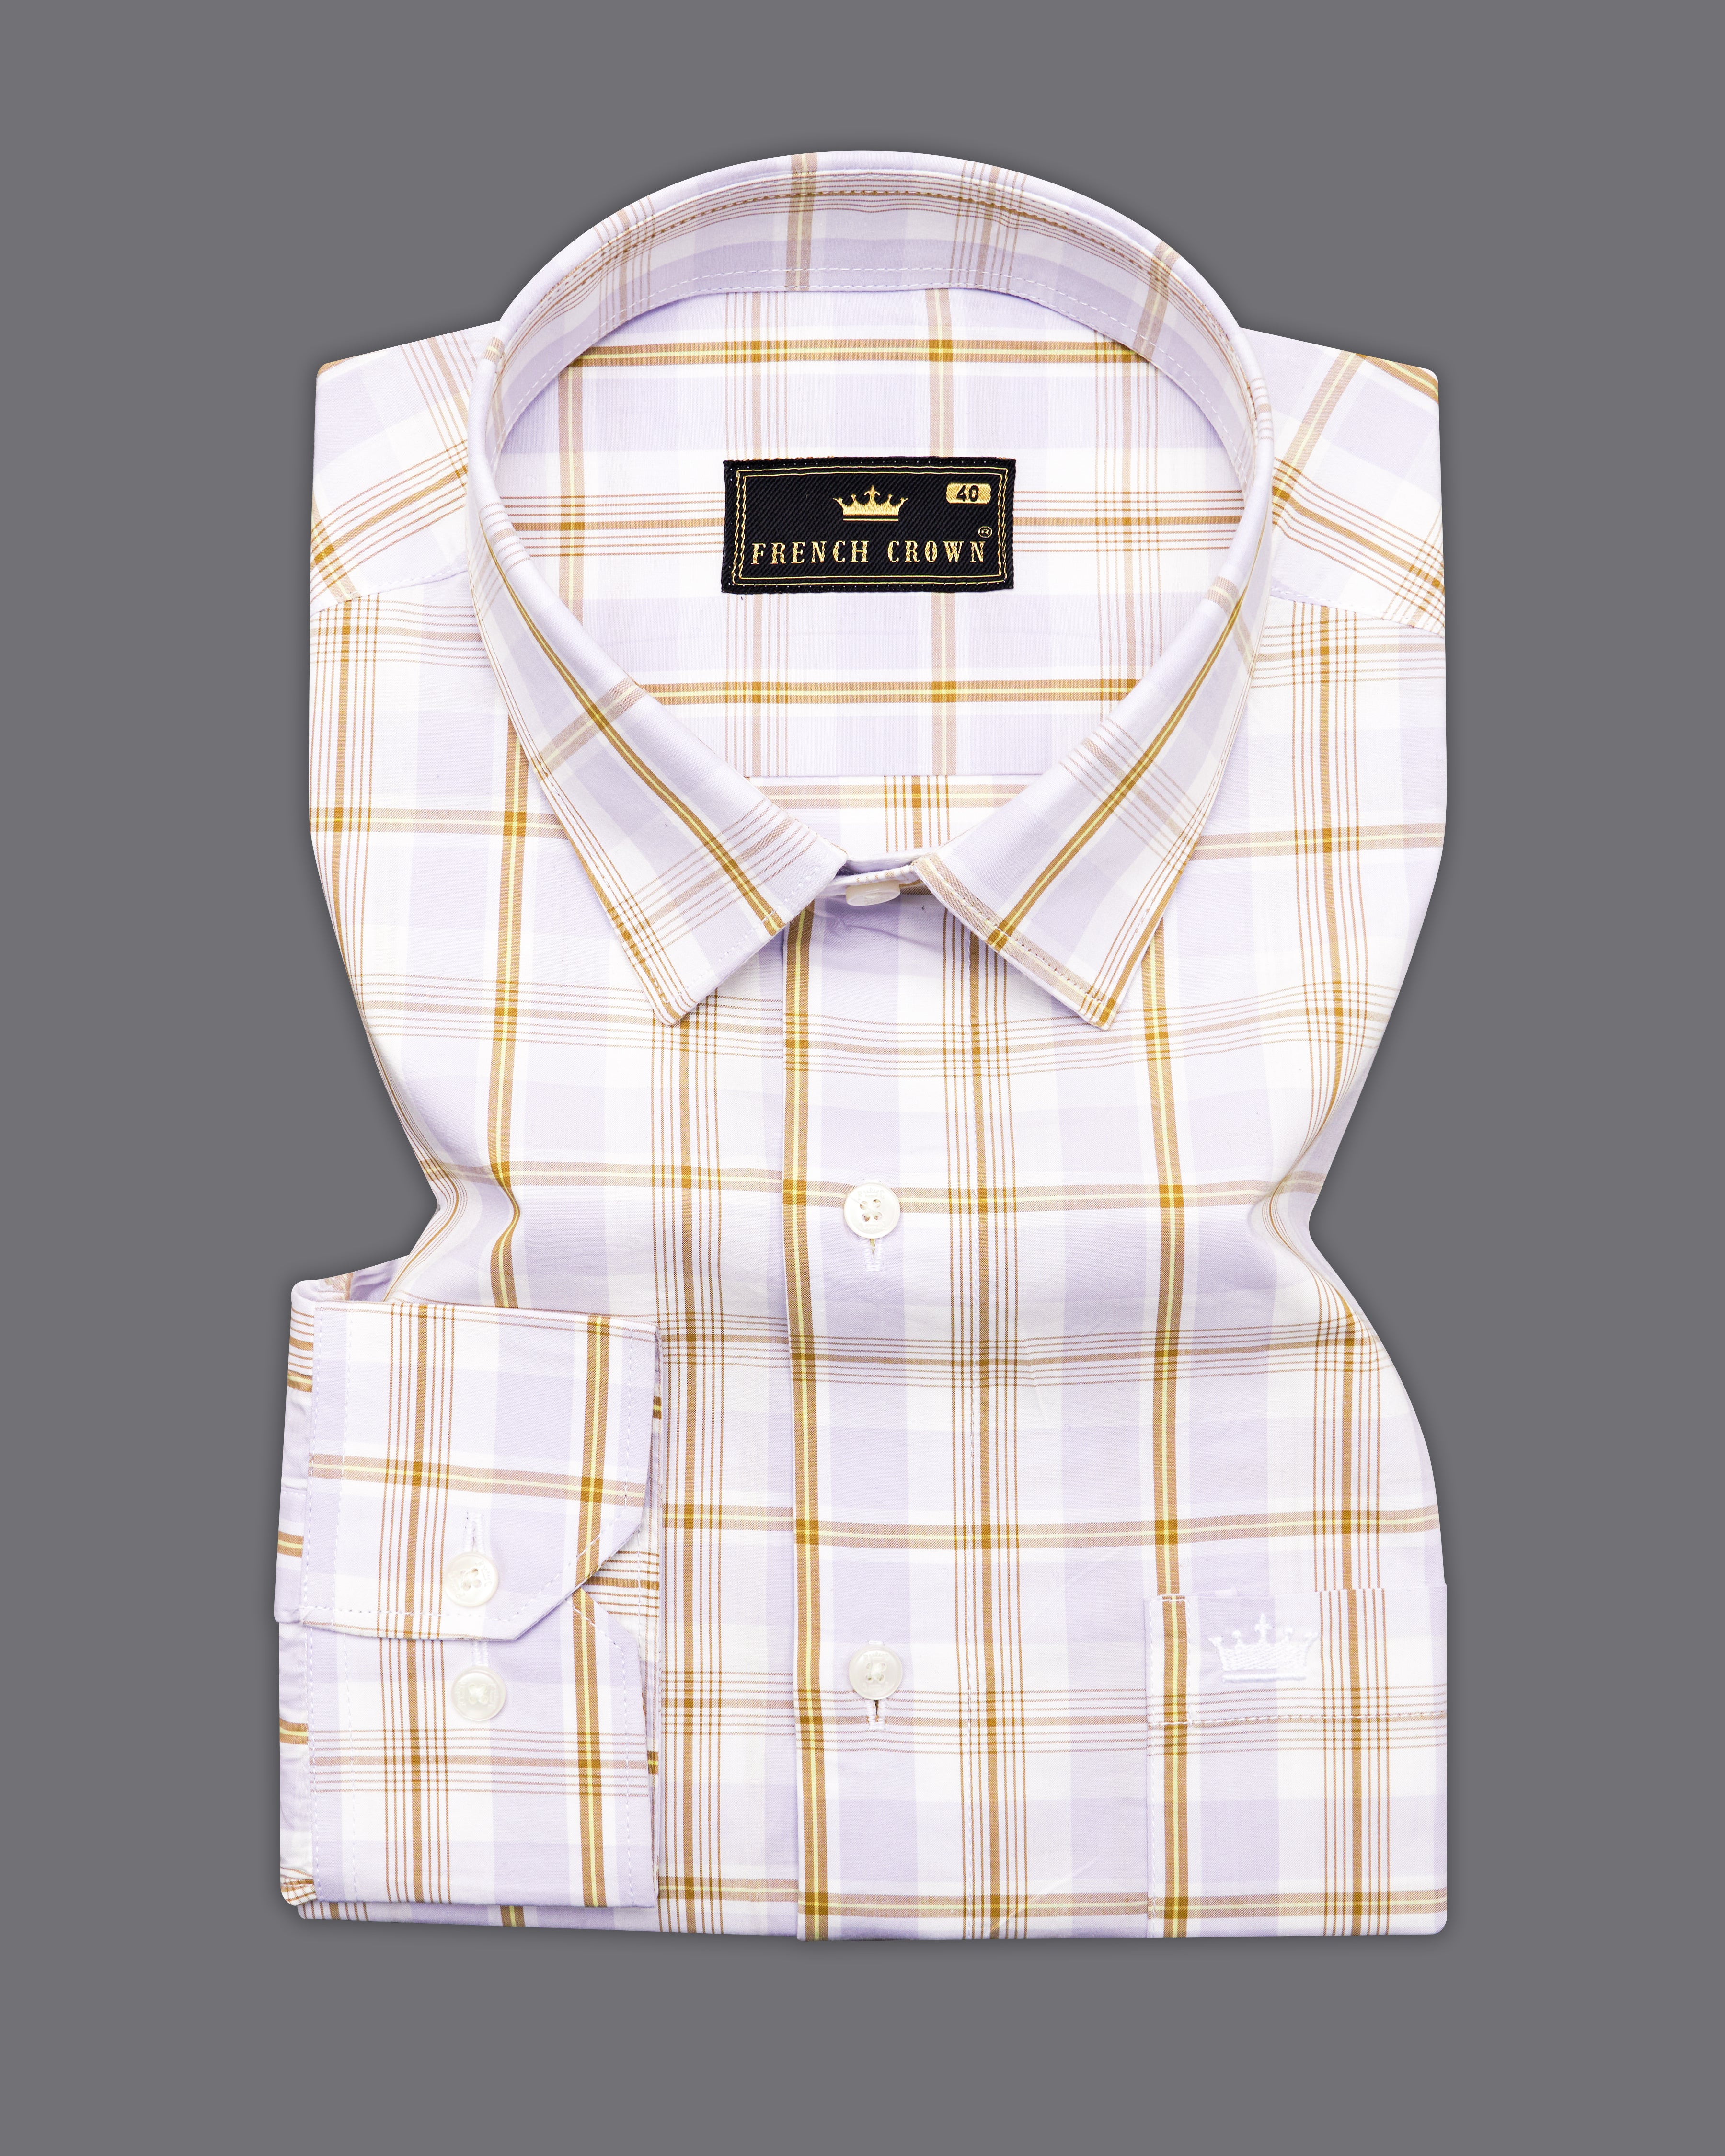 Amour Lavender with Leather Brown Checkered Floral Embroidered Premium Cotton Designer Shirt 7755-EH087-38, 7755-EH087-H-38, 7755-EH087-39, 7755-EH087-H-39, 7755-EH087-40, 7755-EH087-H-40, 7755-EH087-42, 7755-EH087-H-42, 7755-EH087-44, 7755-EH087-H-44, 7755-EH087-46, 7755-EH087-H-46, 7755-EH087-48, 7755-EH087-H-48, 7755-EH087-50, 7755-EH087-H-50, 7755-EH087-52, 7755-EH087-H-52